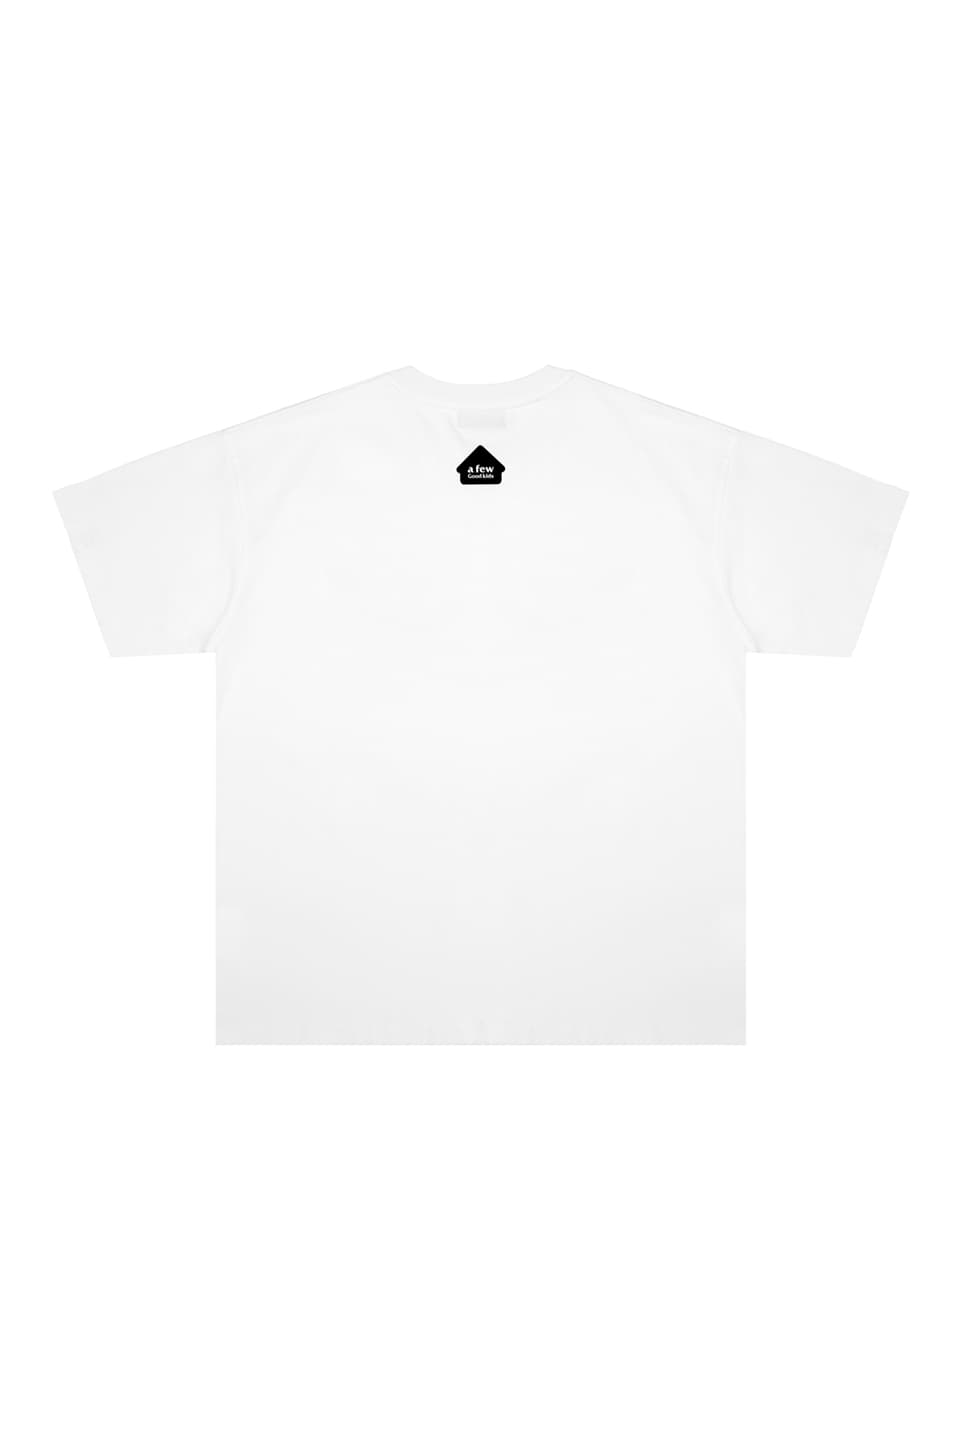 Logo In Mouth Tee